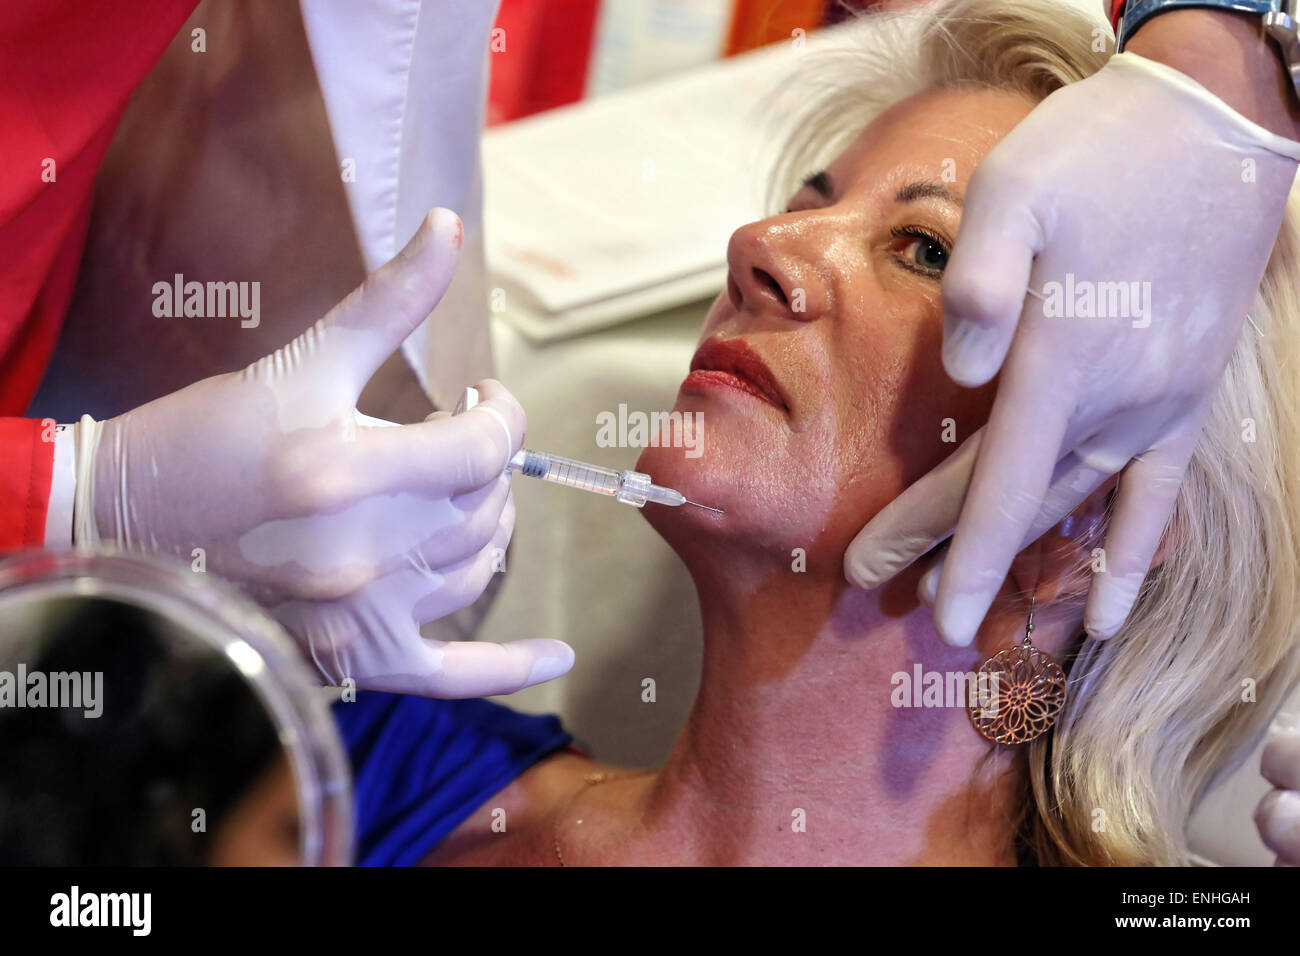 A facial plastic surgery specialist injected hyaluronic acid under the facial skin of a  client. Dortmund, Germany Stock Photo